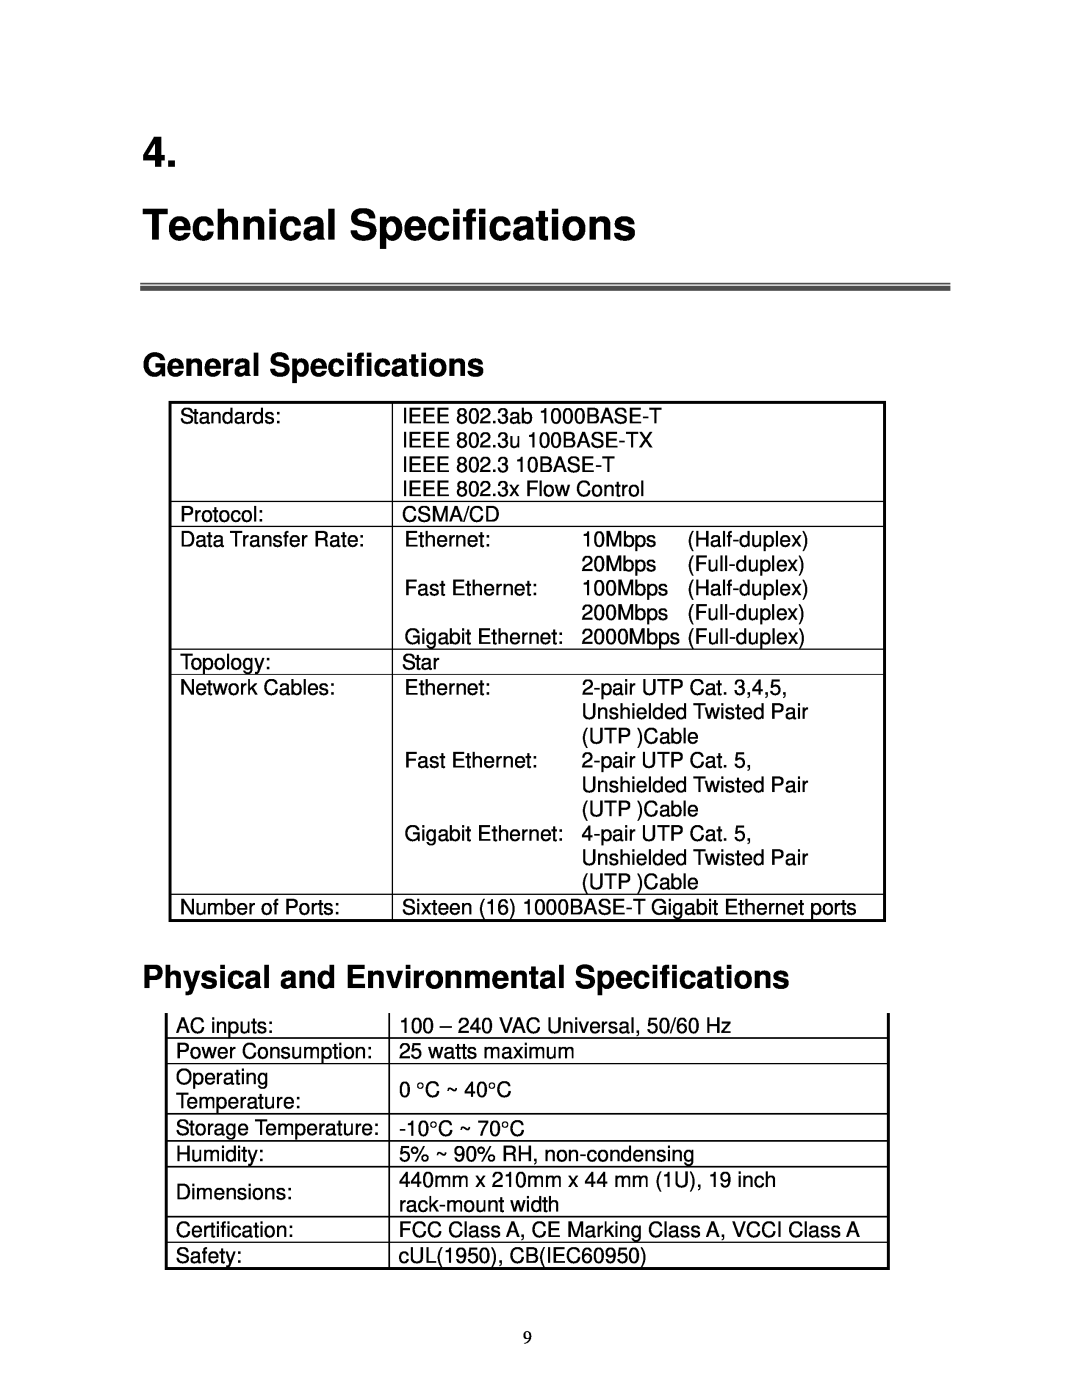 Milan Technology MIL-S16000T Technical Specifications, General Specifications, Physical and Environmental Specifications 